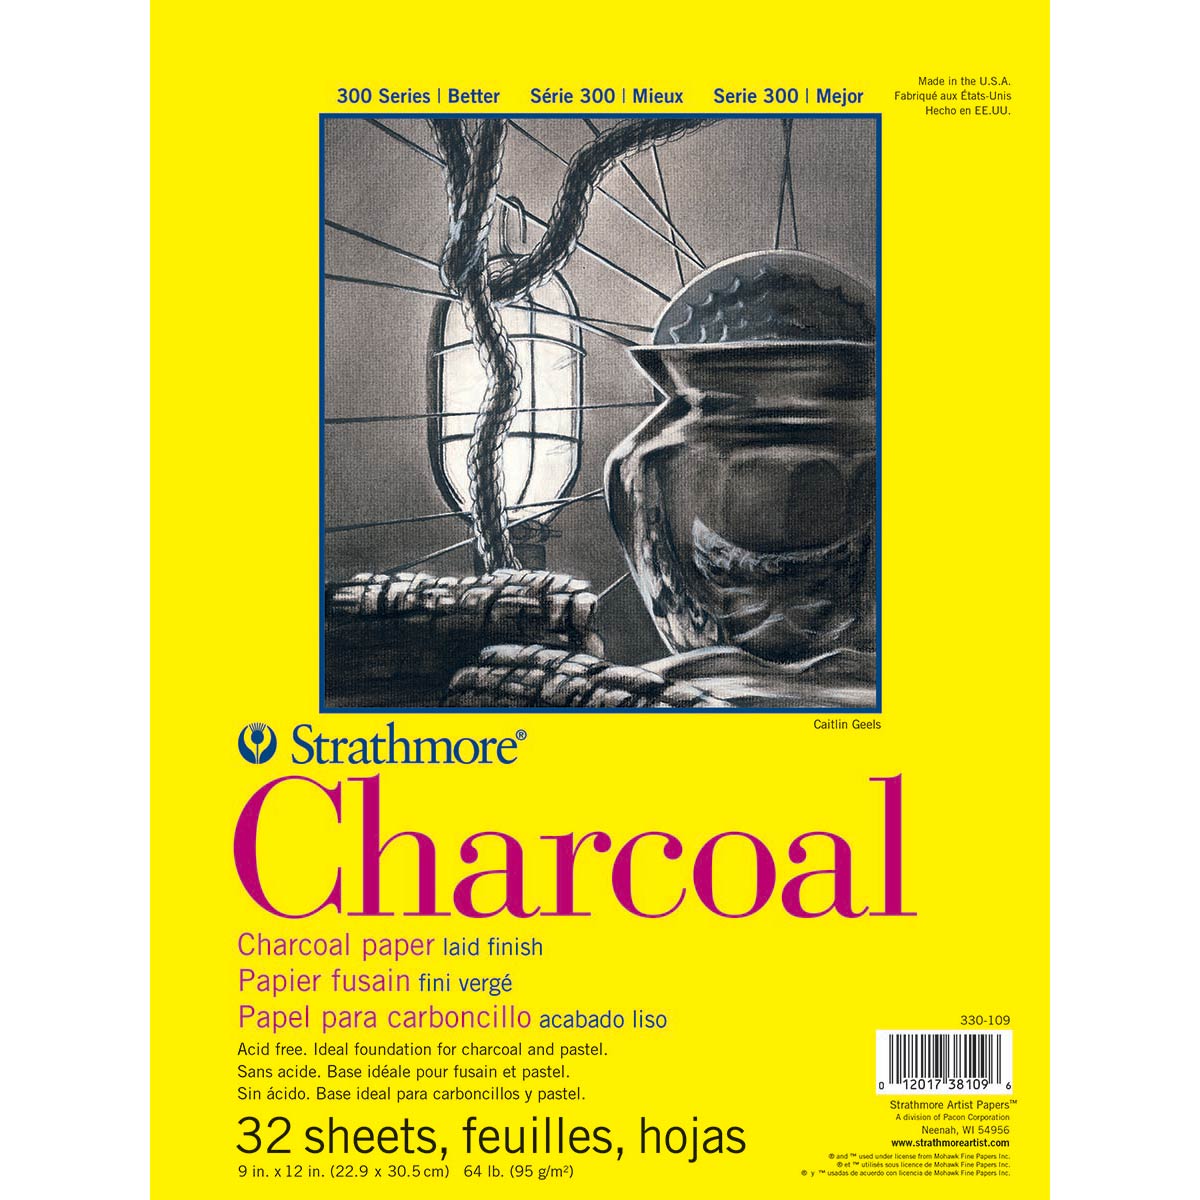 Strathmore - 300 Charcoal Pad 95gsm 11x17" 32 sheets